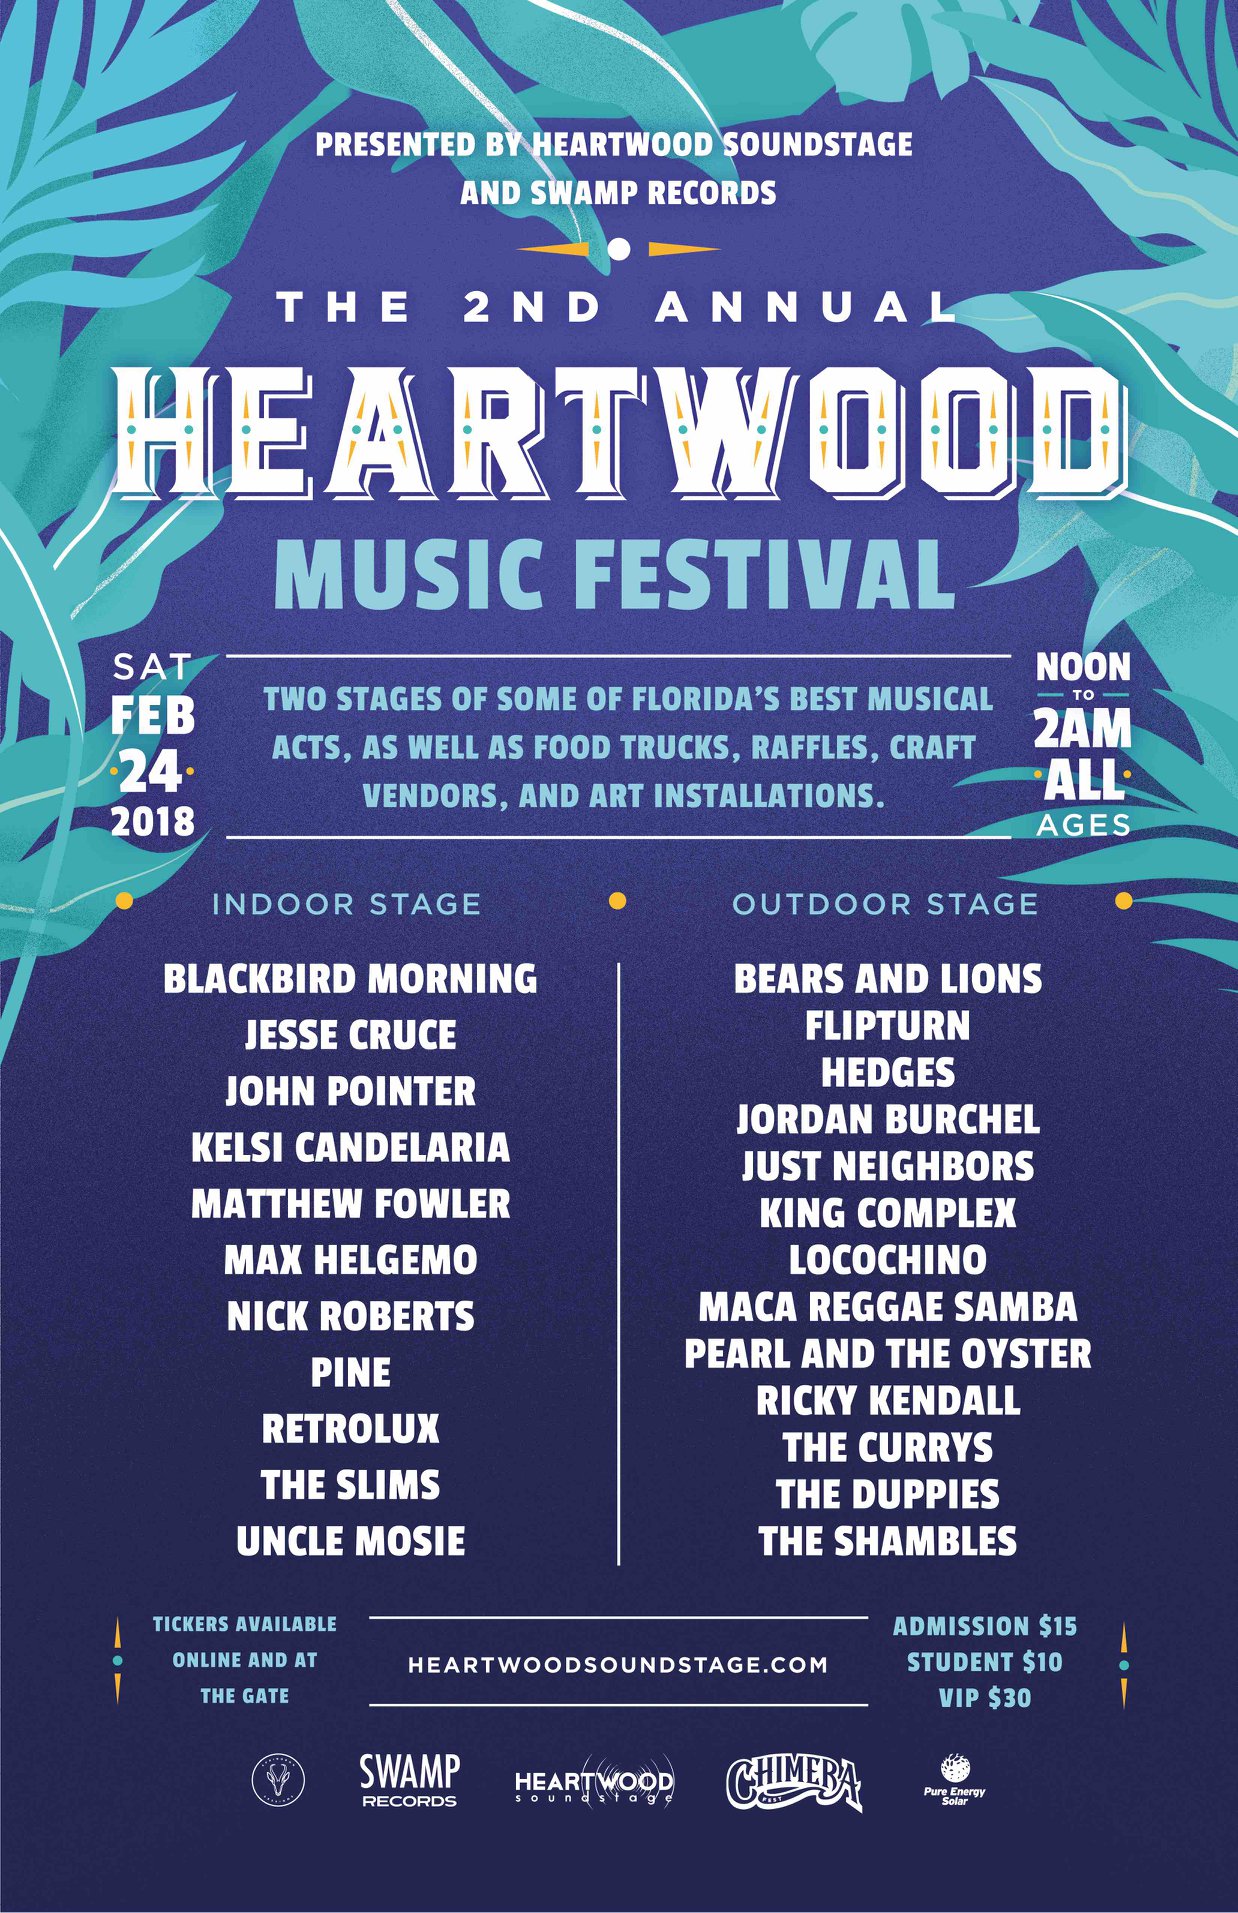 The 2nd Annual Heartwood Music Festival Heartwood Soundstage